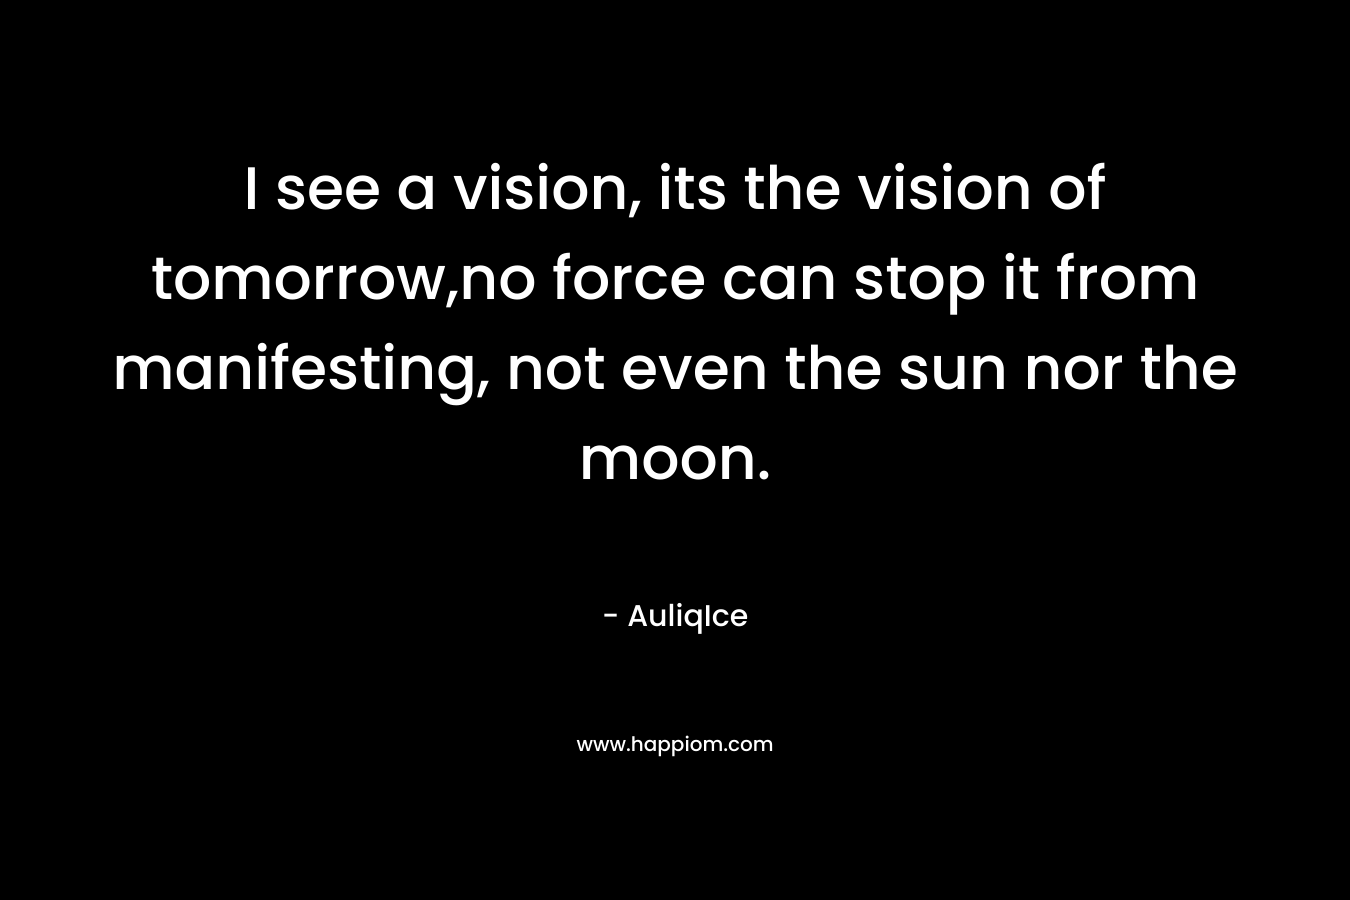 I see a vision, its the vision of tomorrow,no force can stop it from manifesting, not even the sun nor the moon.